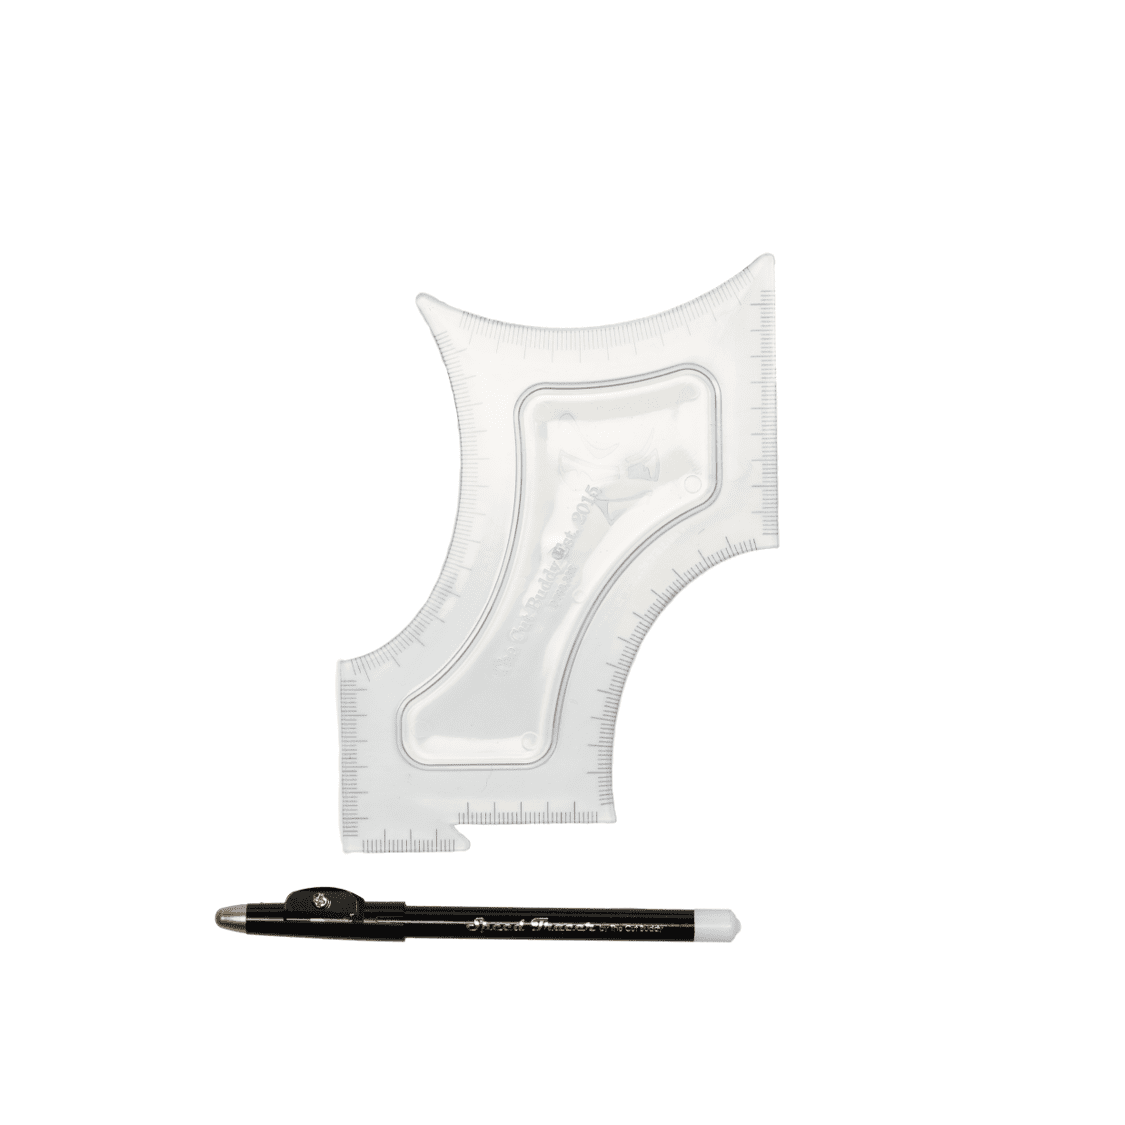 The Cut Buddy - Multiple Curve Beard Shaping Tool and Haircut Guide Template - Clear Color - Tracer Pencil Included